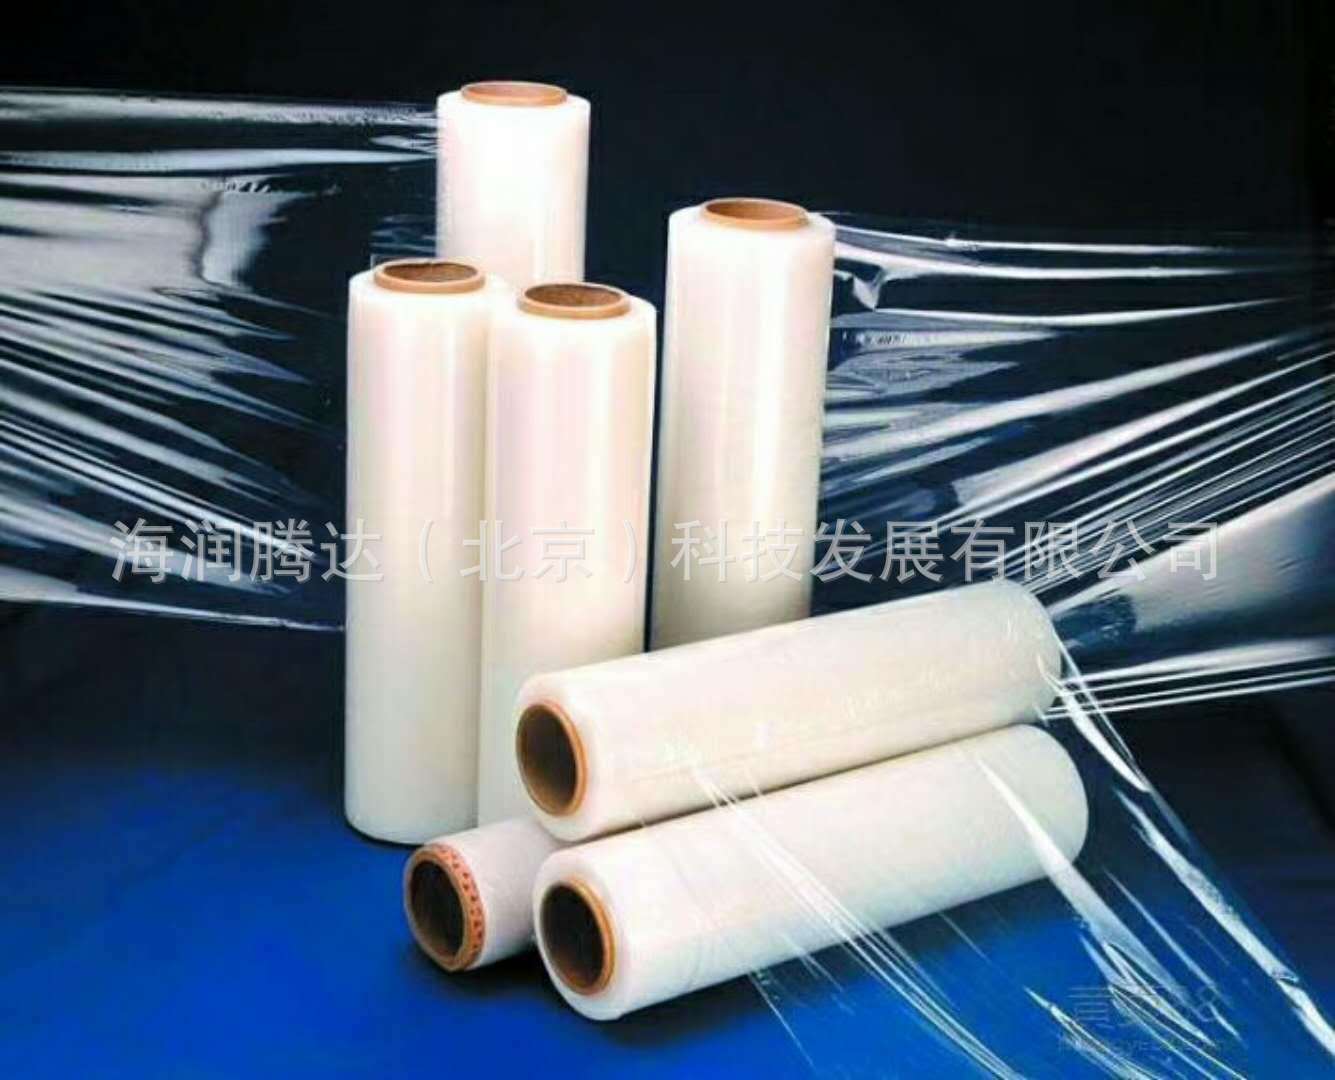 Stretch film direct deal Wrapping film PE Industrial packaging film Pallet packing film wide 50CM